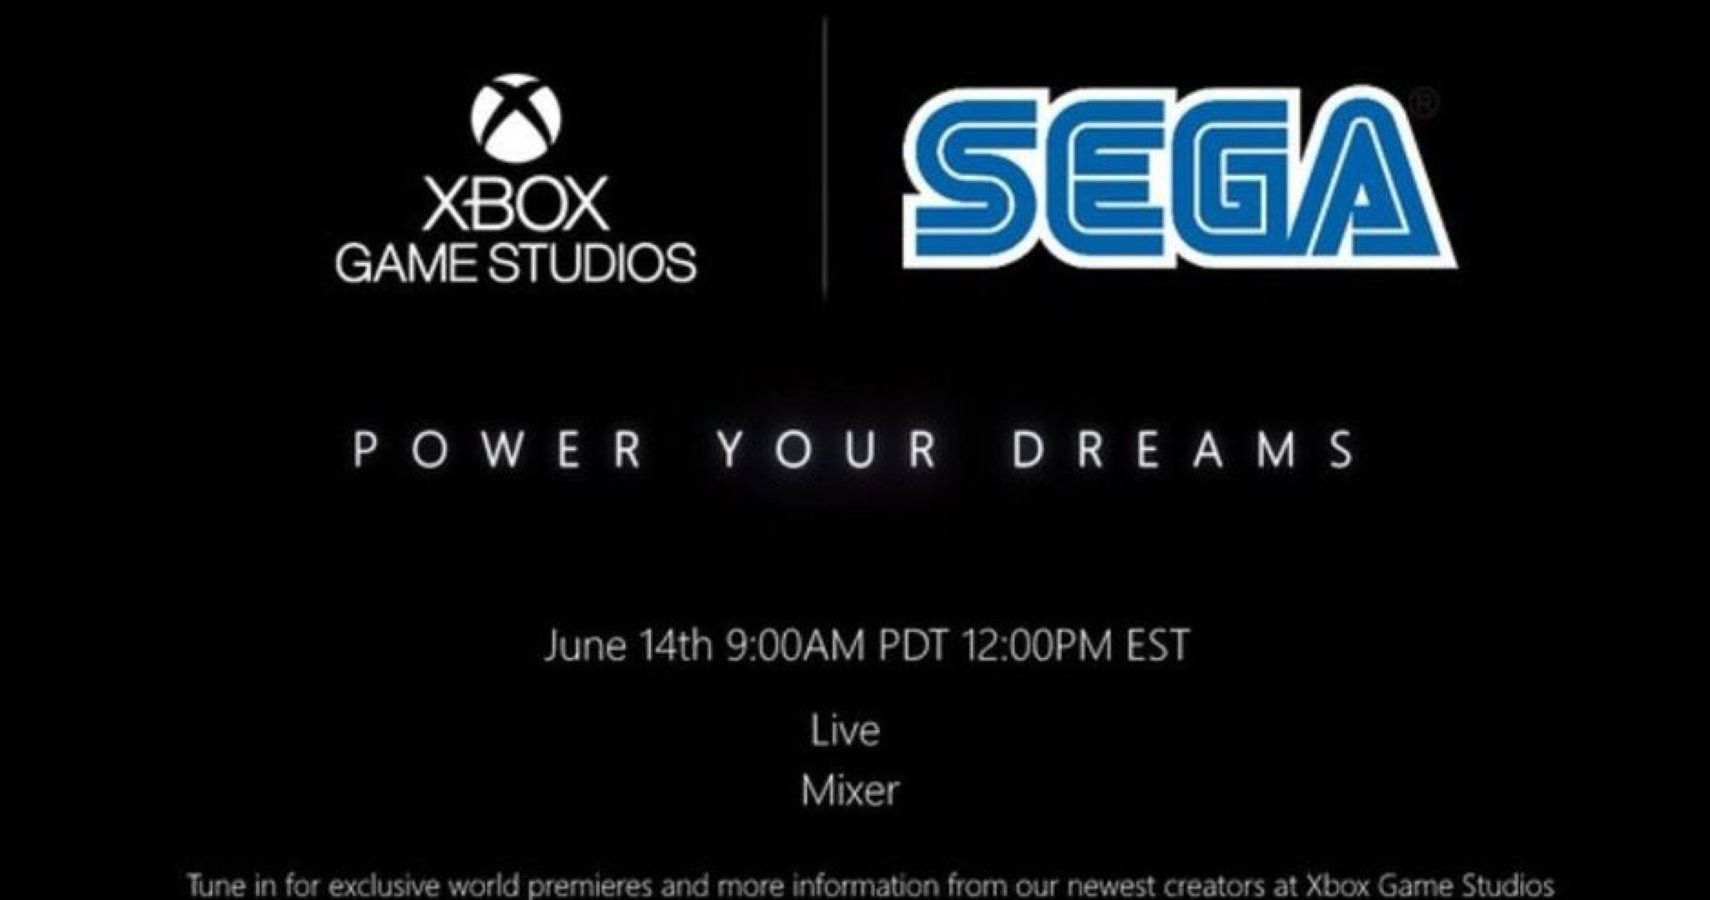 Rumor: Leaked Ad Suggests Collaboration Between Sega And Microsoft